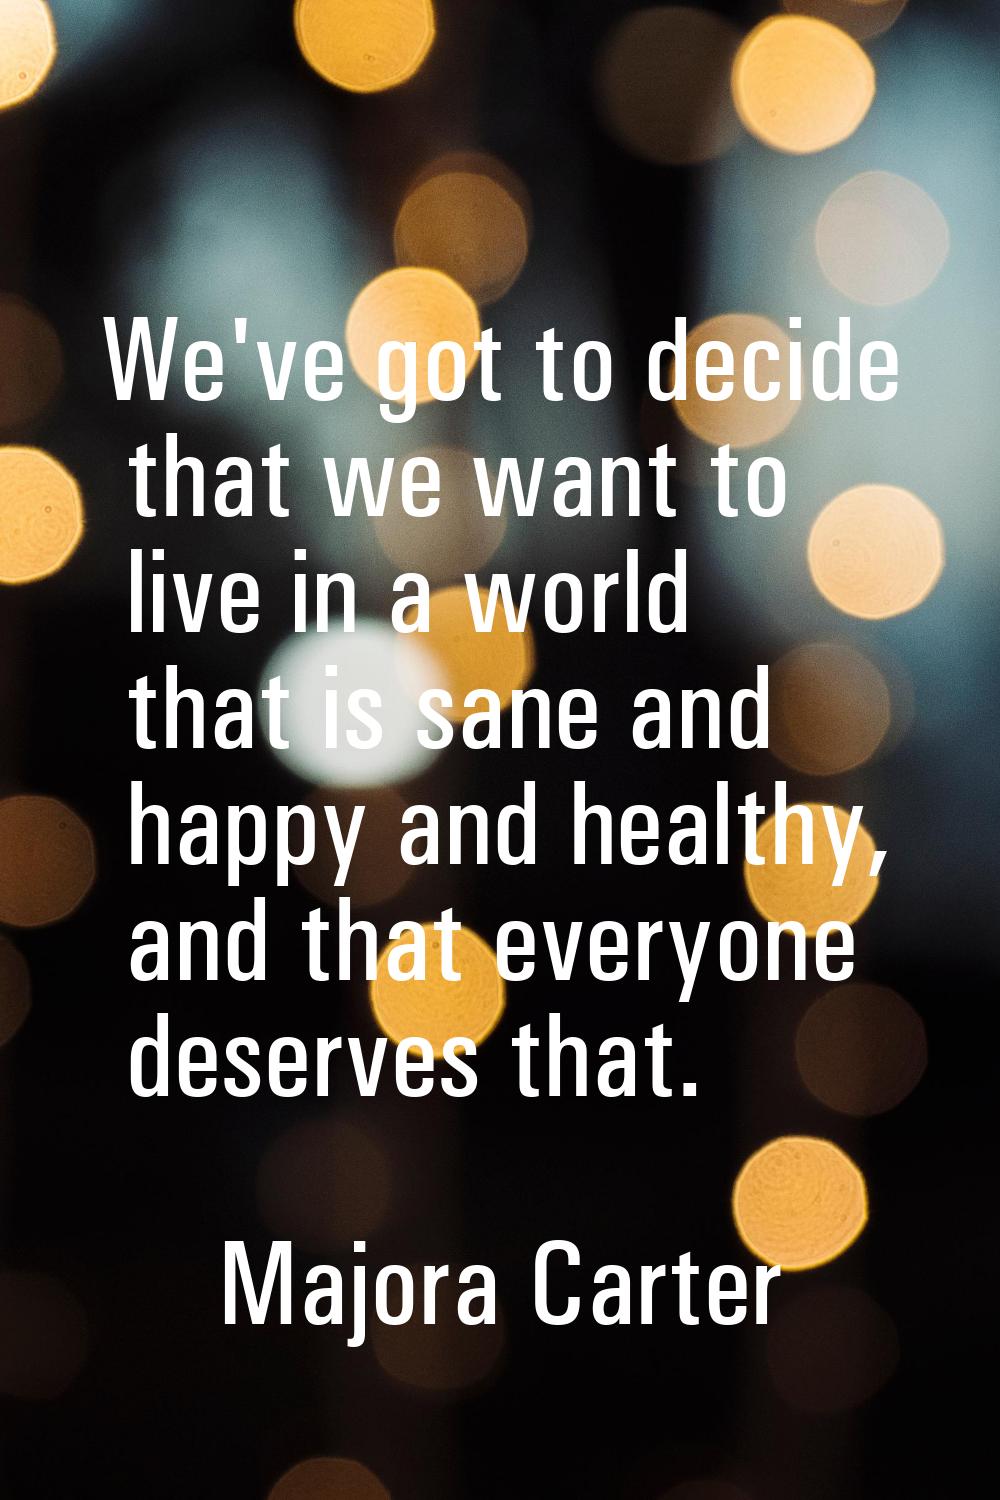 We've got to decide that we want to live in a world that is sane and happy and healthy, and that ev